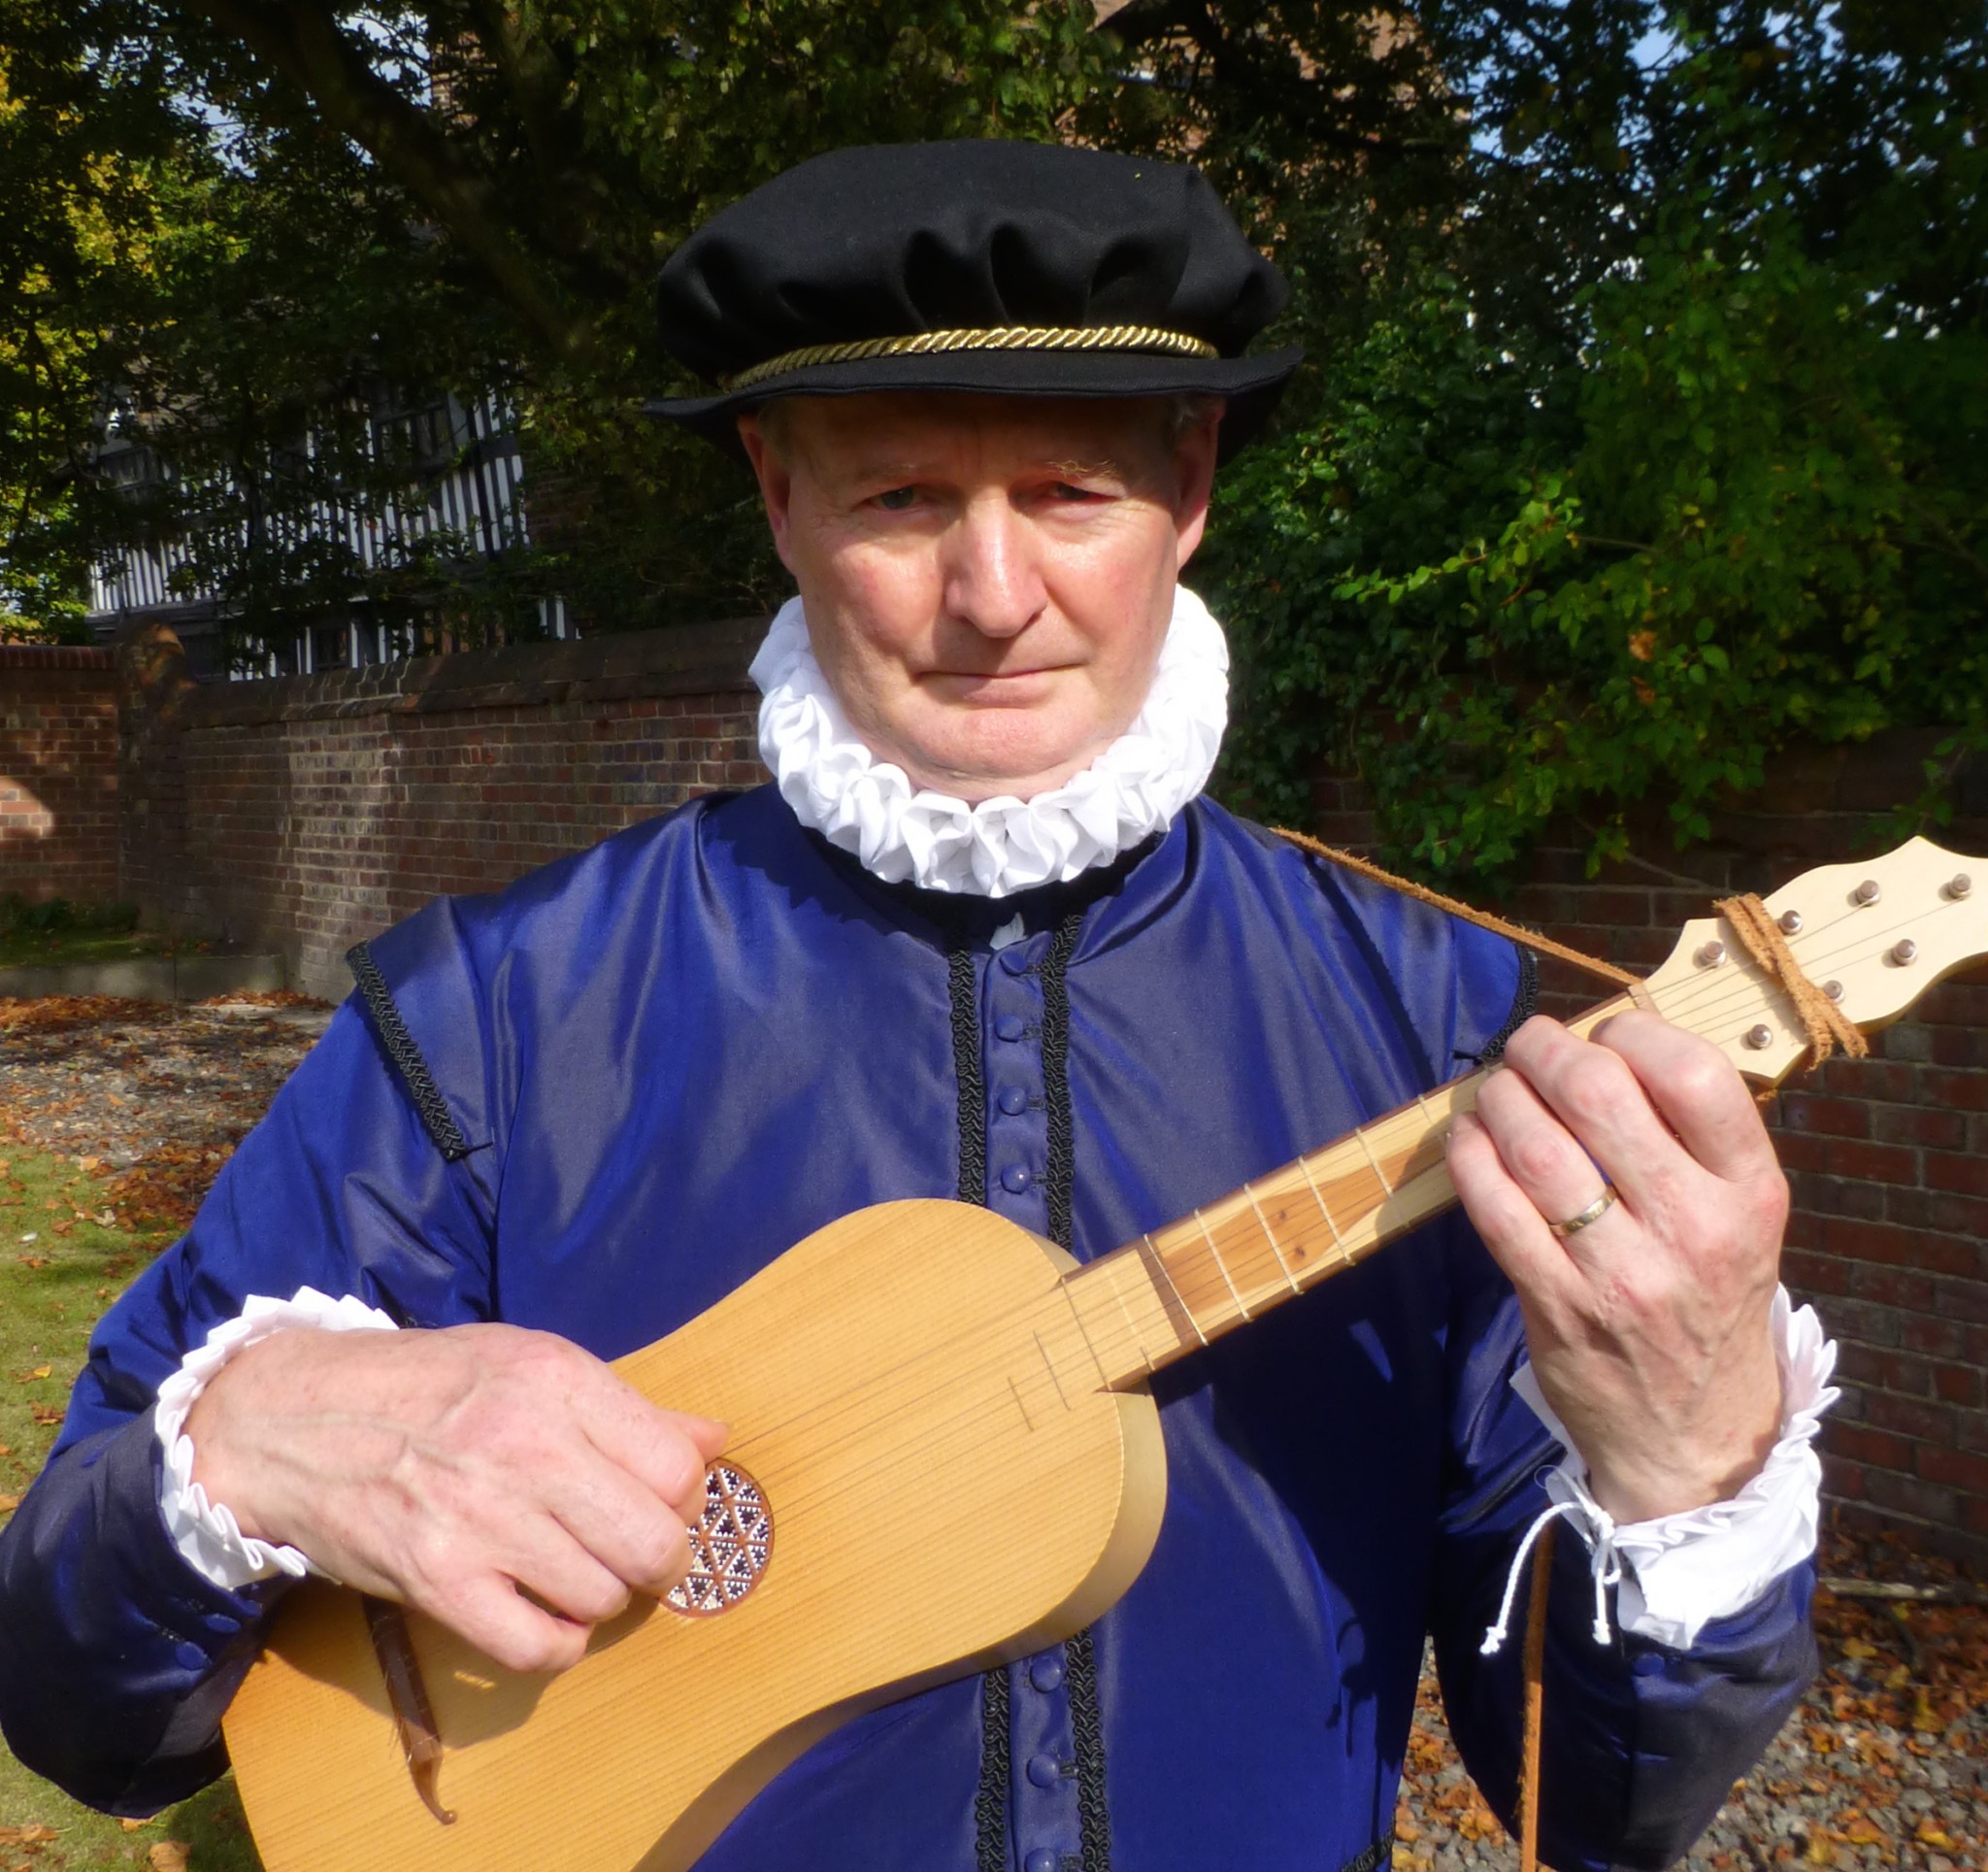 Costumed playing of the lute and a renaissance guitar